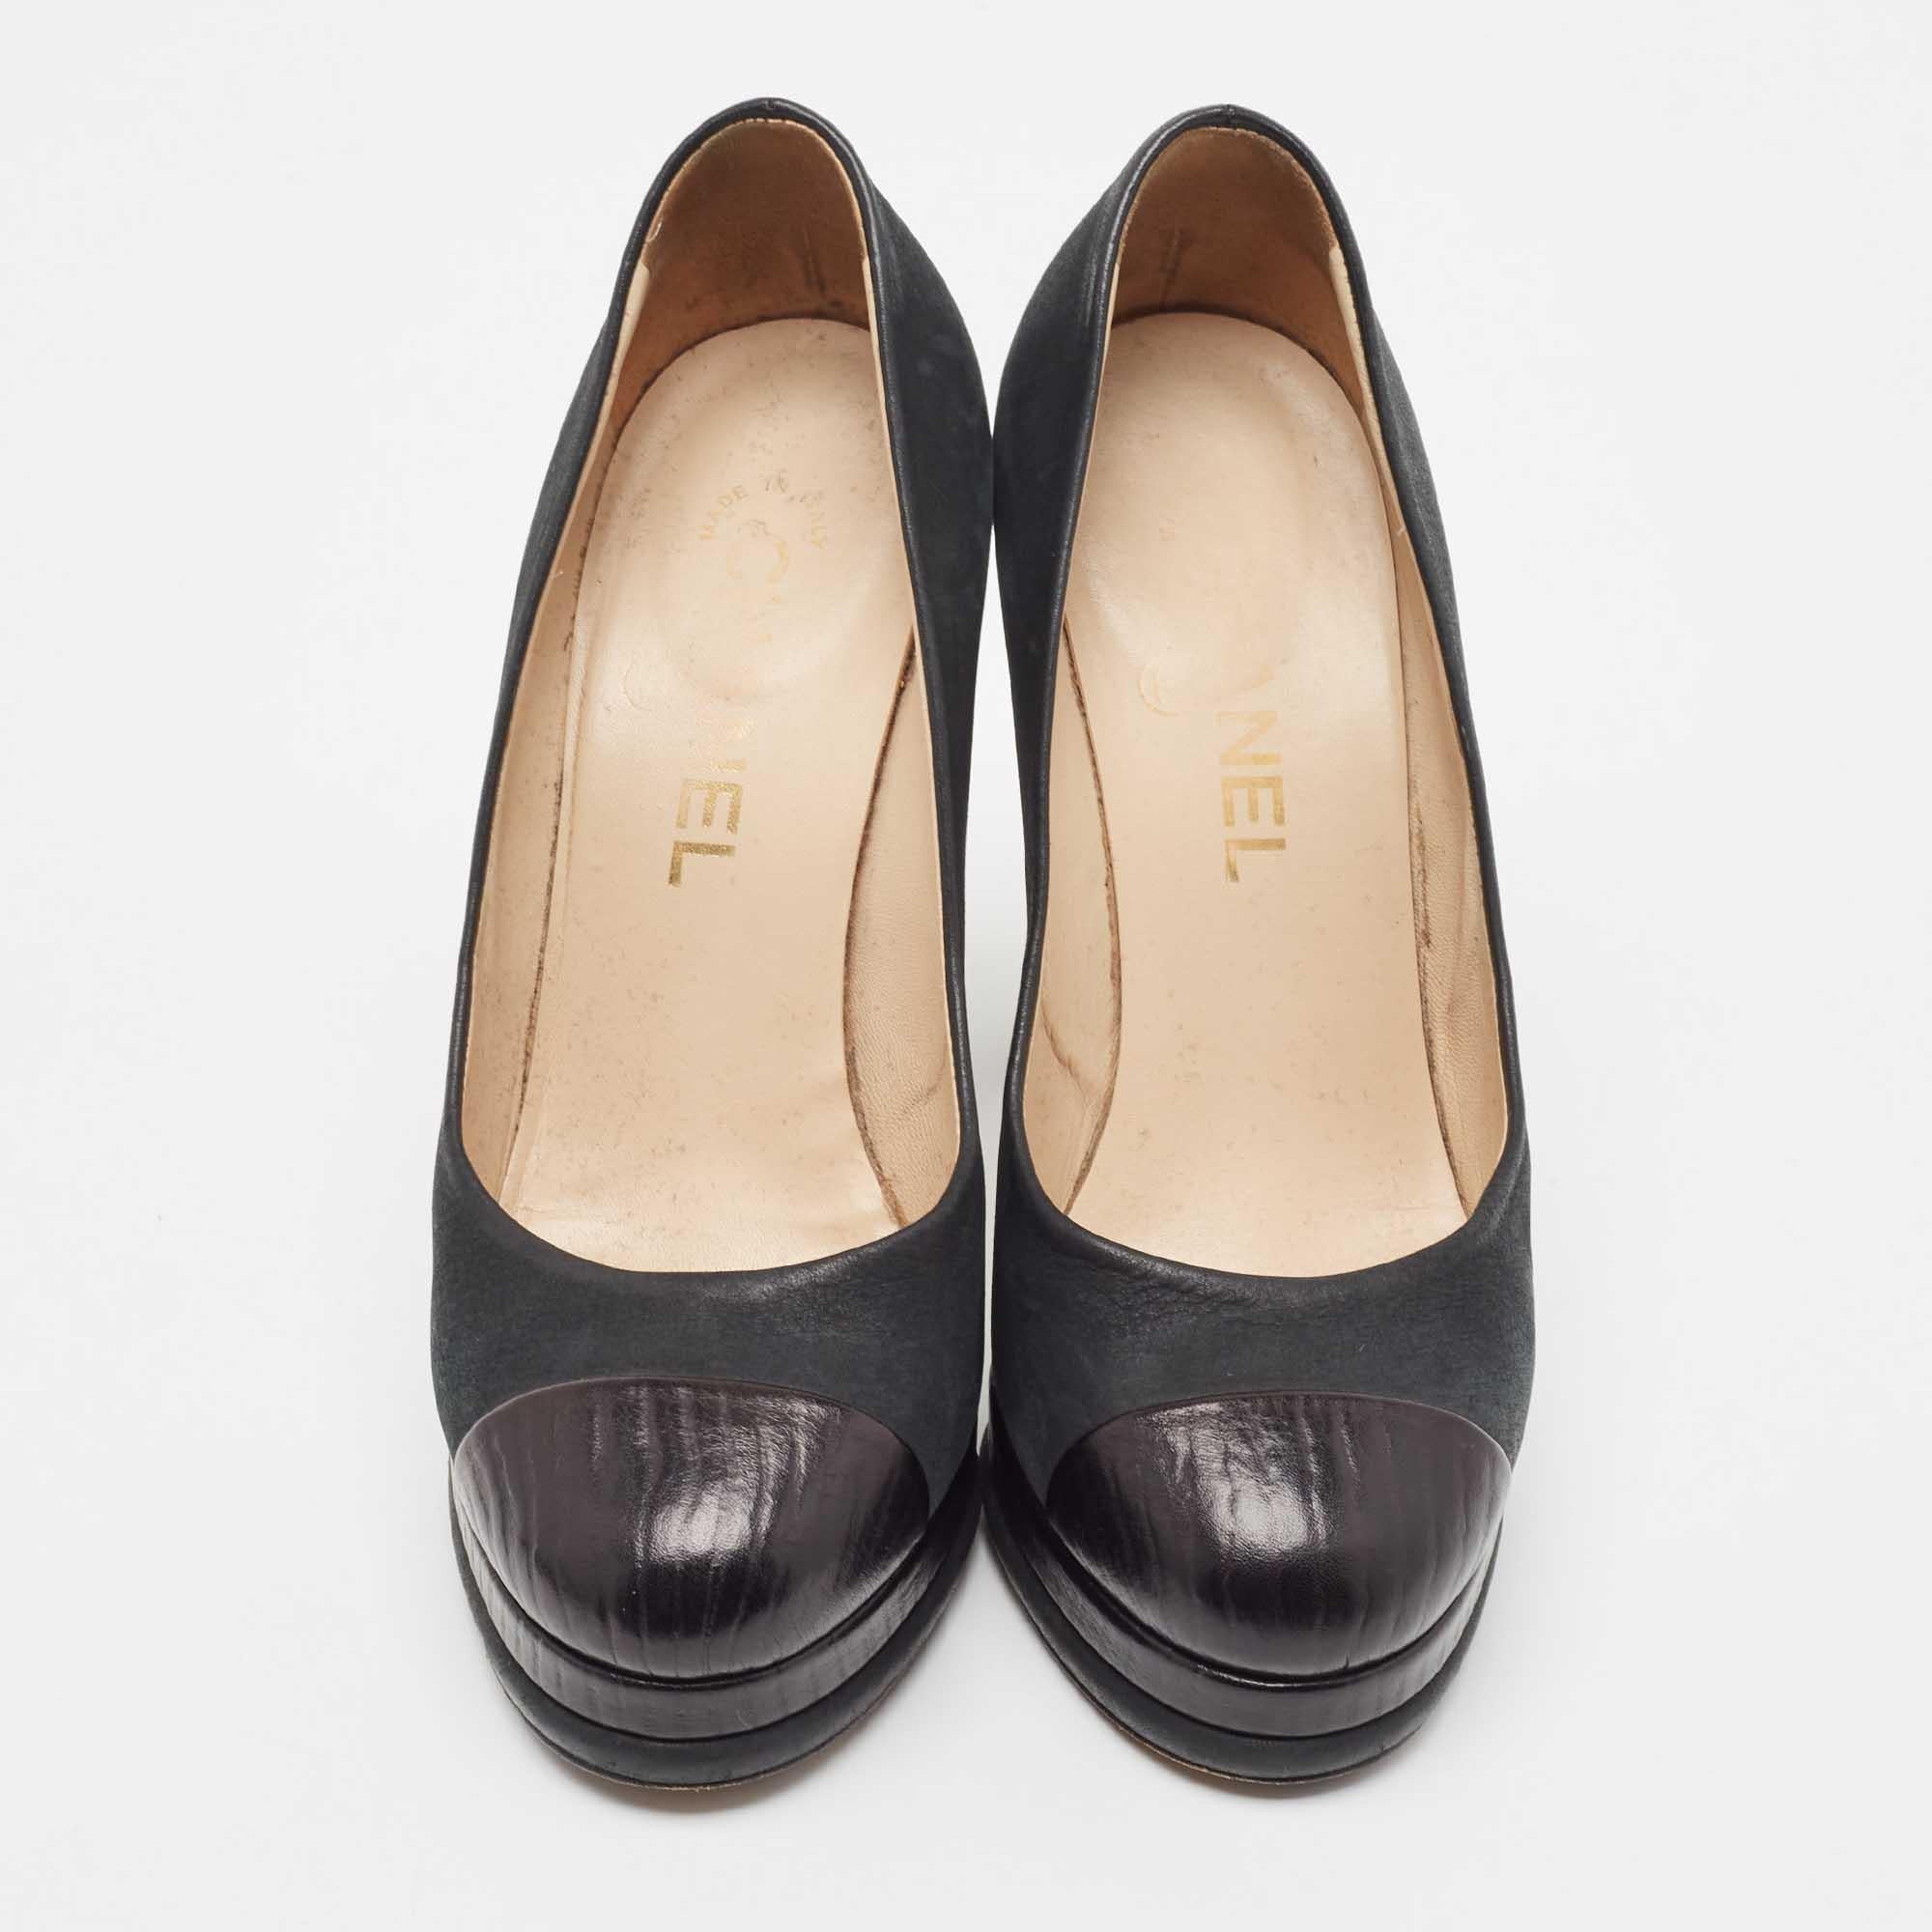 Wonderfully crafted shoes added with notable elements to fit well and pair perfectly with all your plans. Make these Chanel pumps yours today!

Includes: Original Dustbag